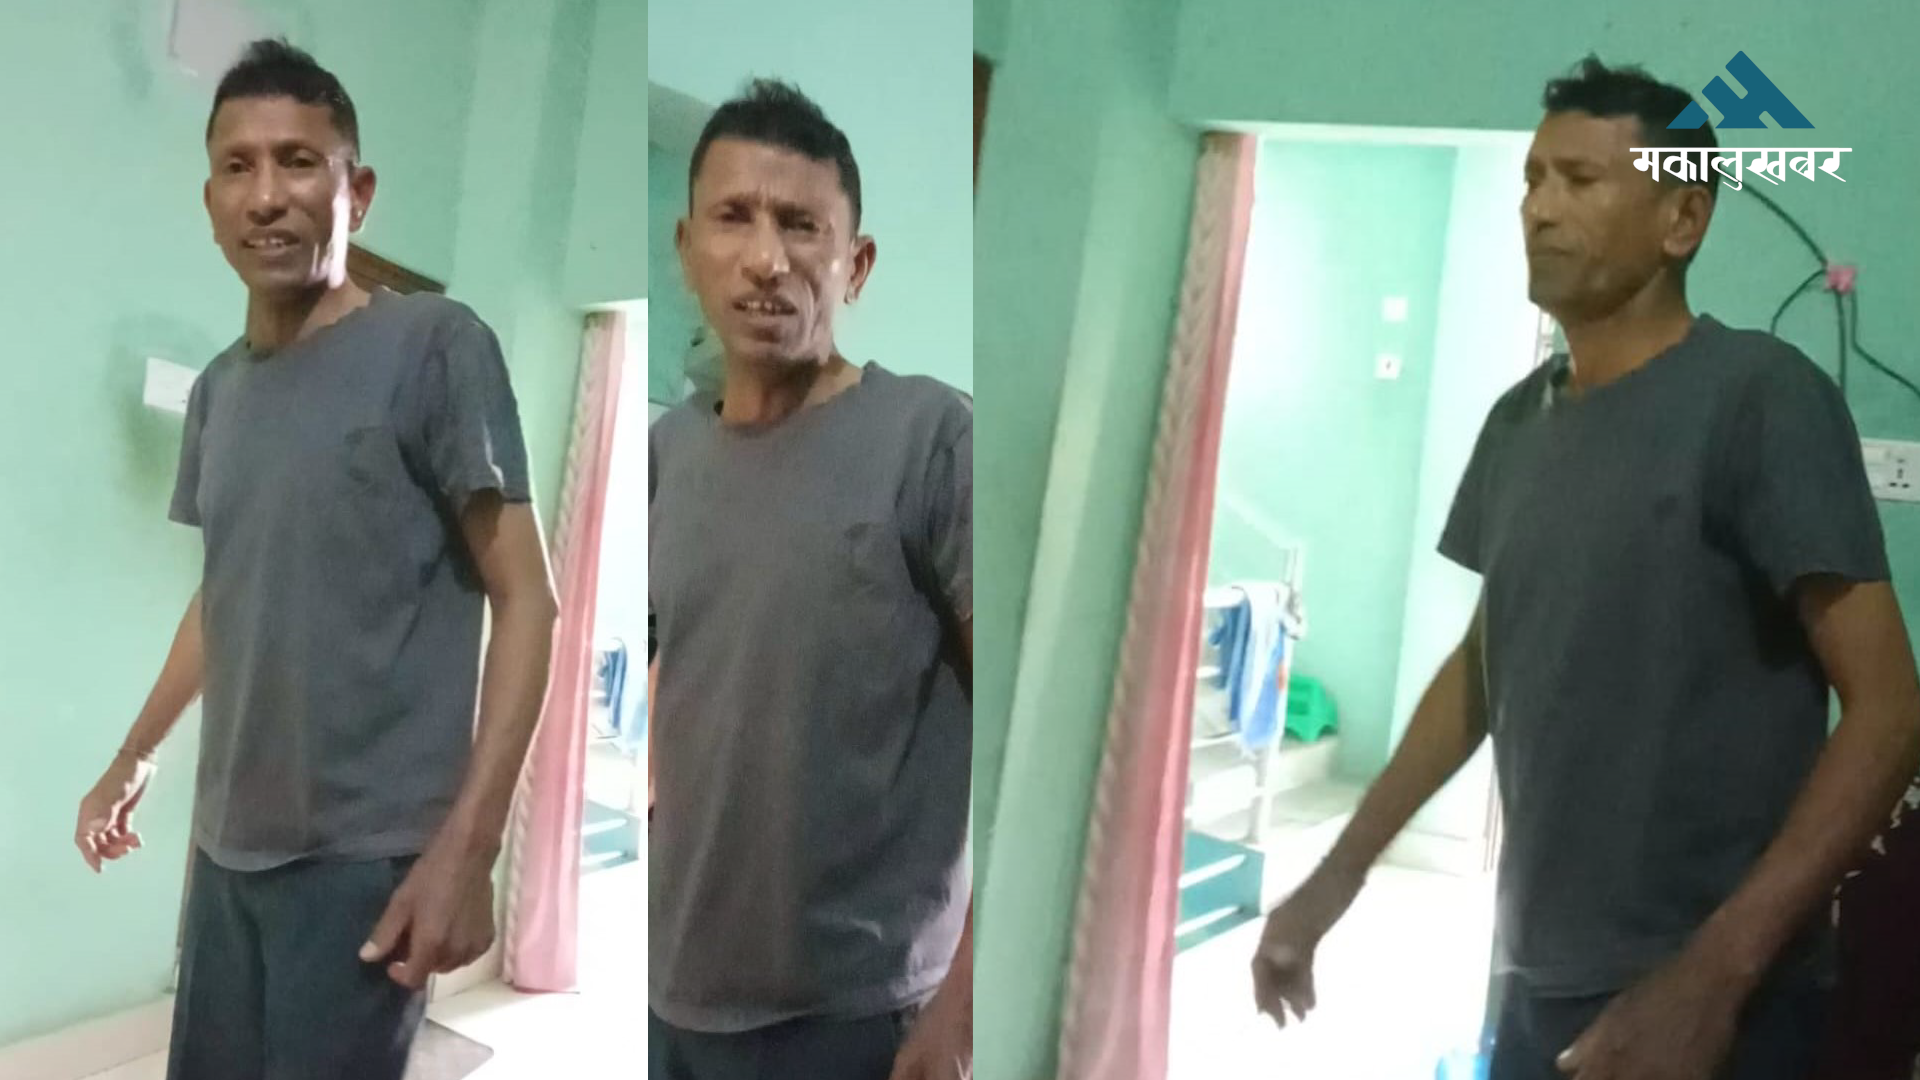 53-year-old man missing for 3 months in Butwal; police seek public’s help